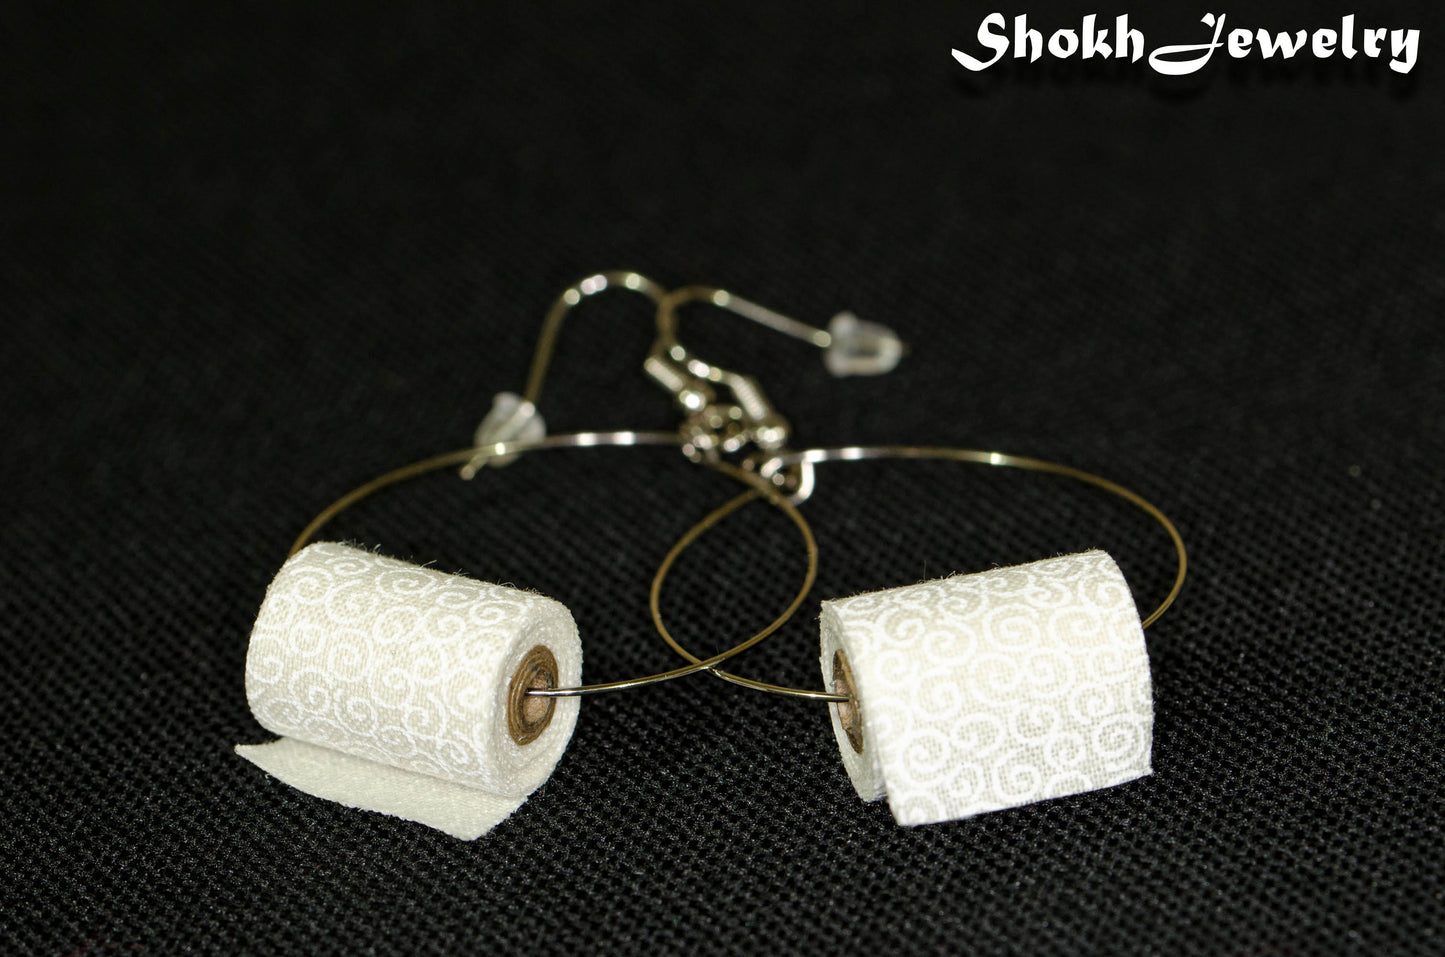 Close up of Large Miniature Toilet Paper Roll Earrings.